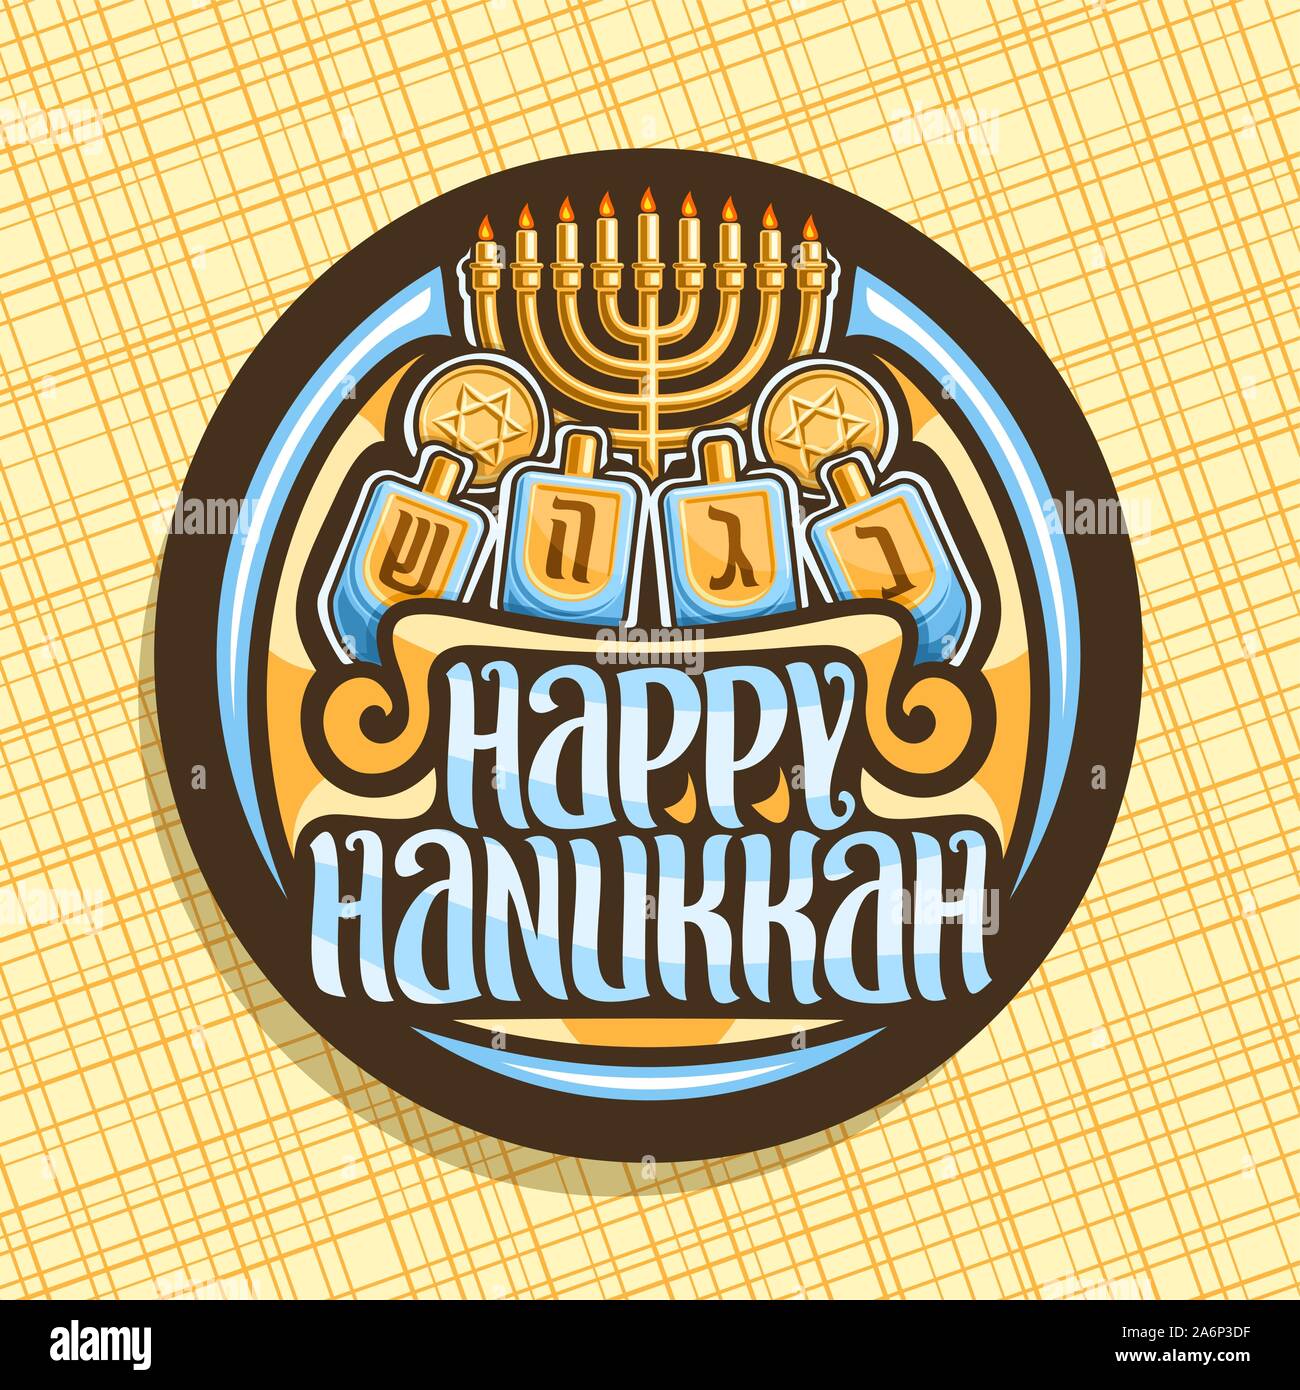 Vector logo for Hanukkah, dark round sticker with golden candelabra, chocolate tokens with star of David and 4 traditional spinning kids toys, origina Stock Vector